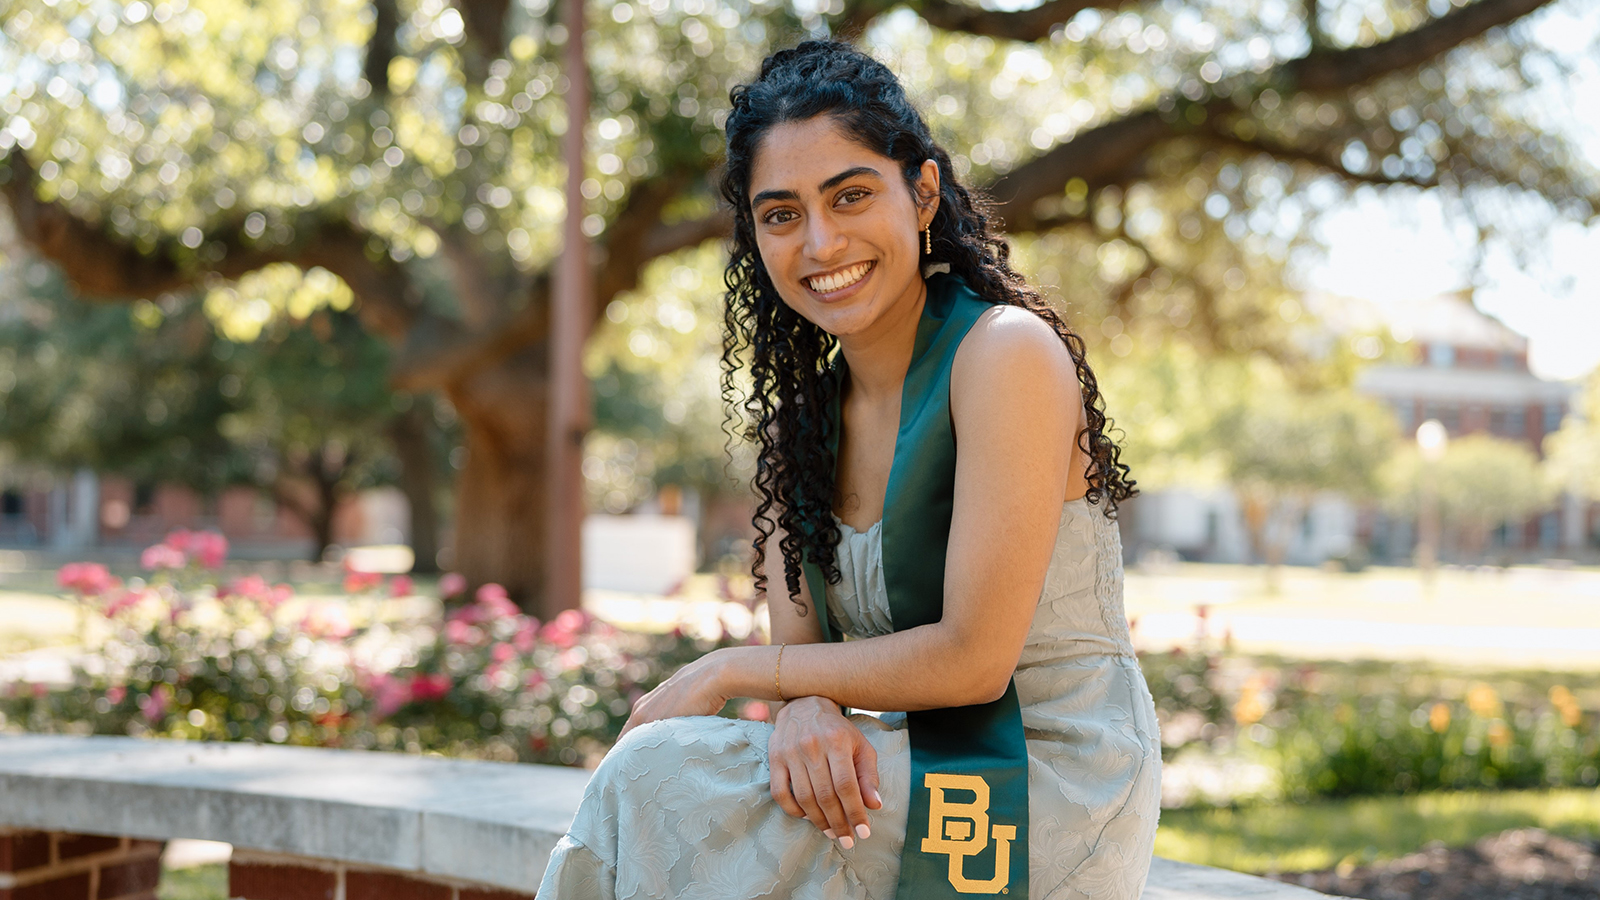 Girl on bench smiling with graduate clothing